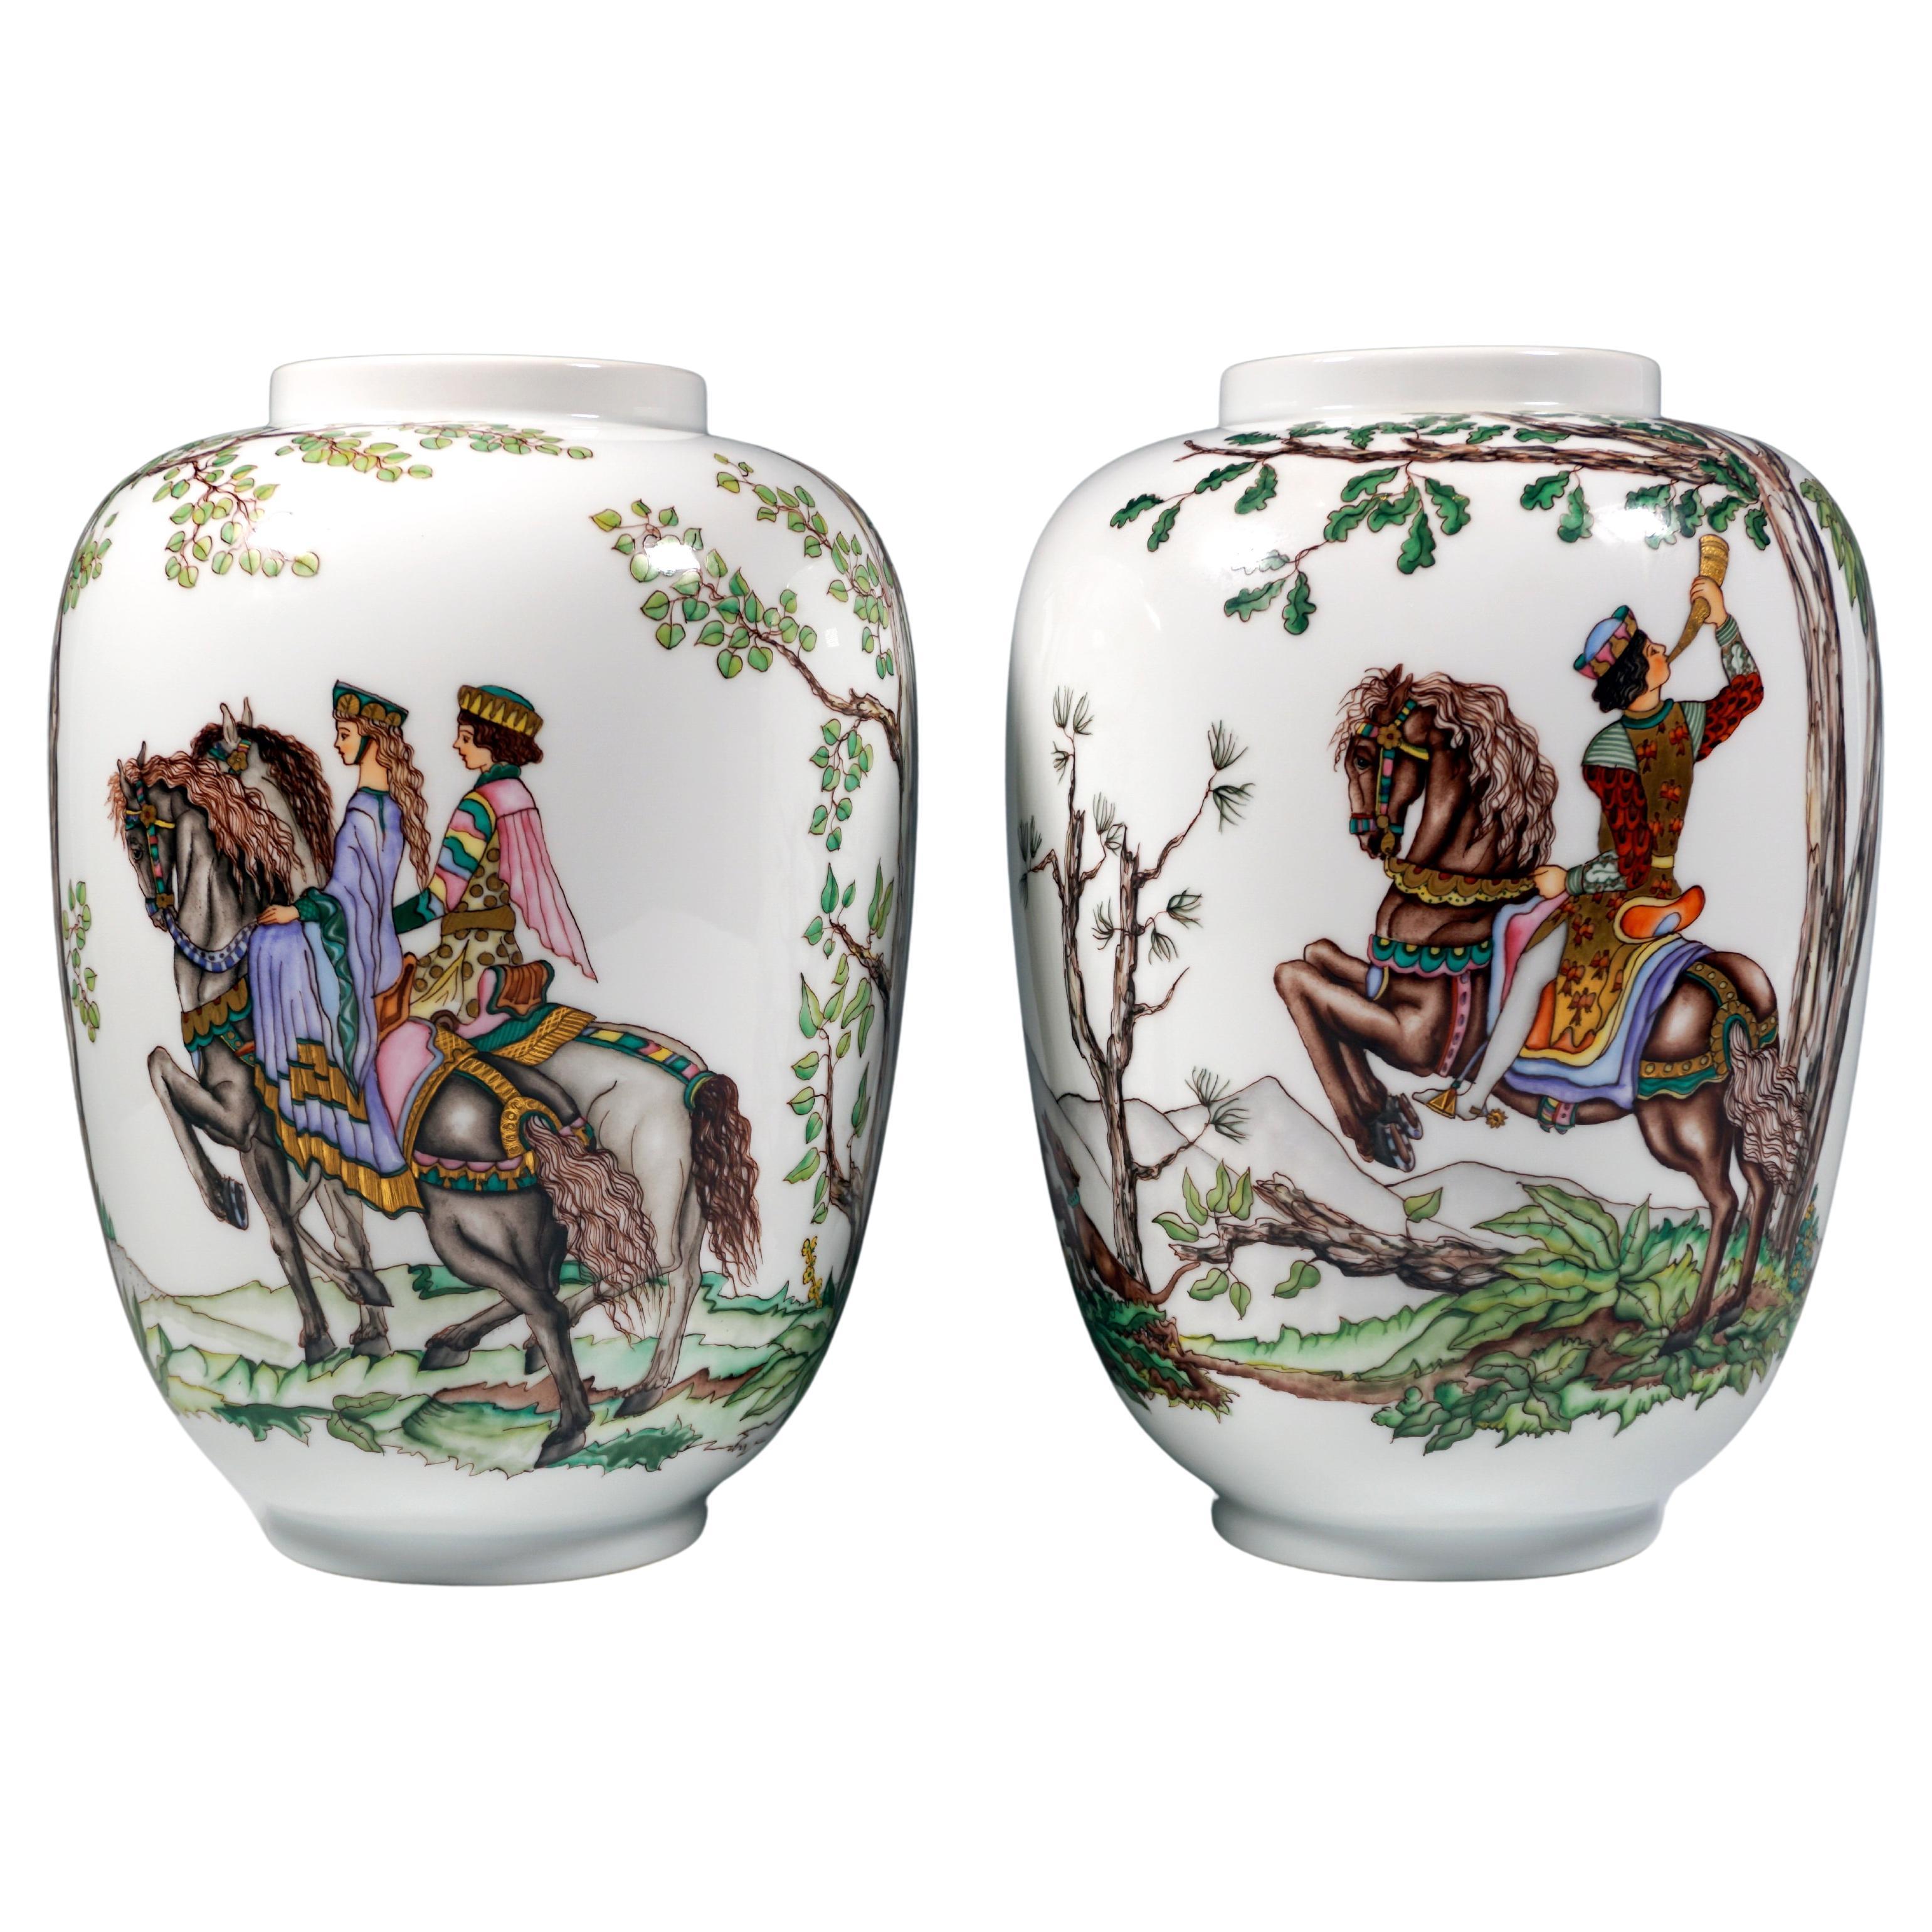 'Falcon Hunt' Pair Of Large Lampion Vases, By Augarten Vienna, Mid-20th